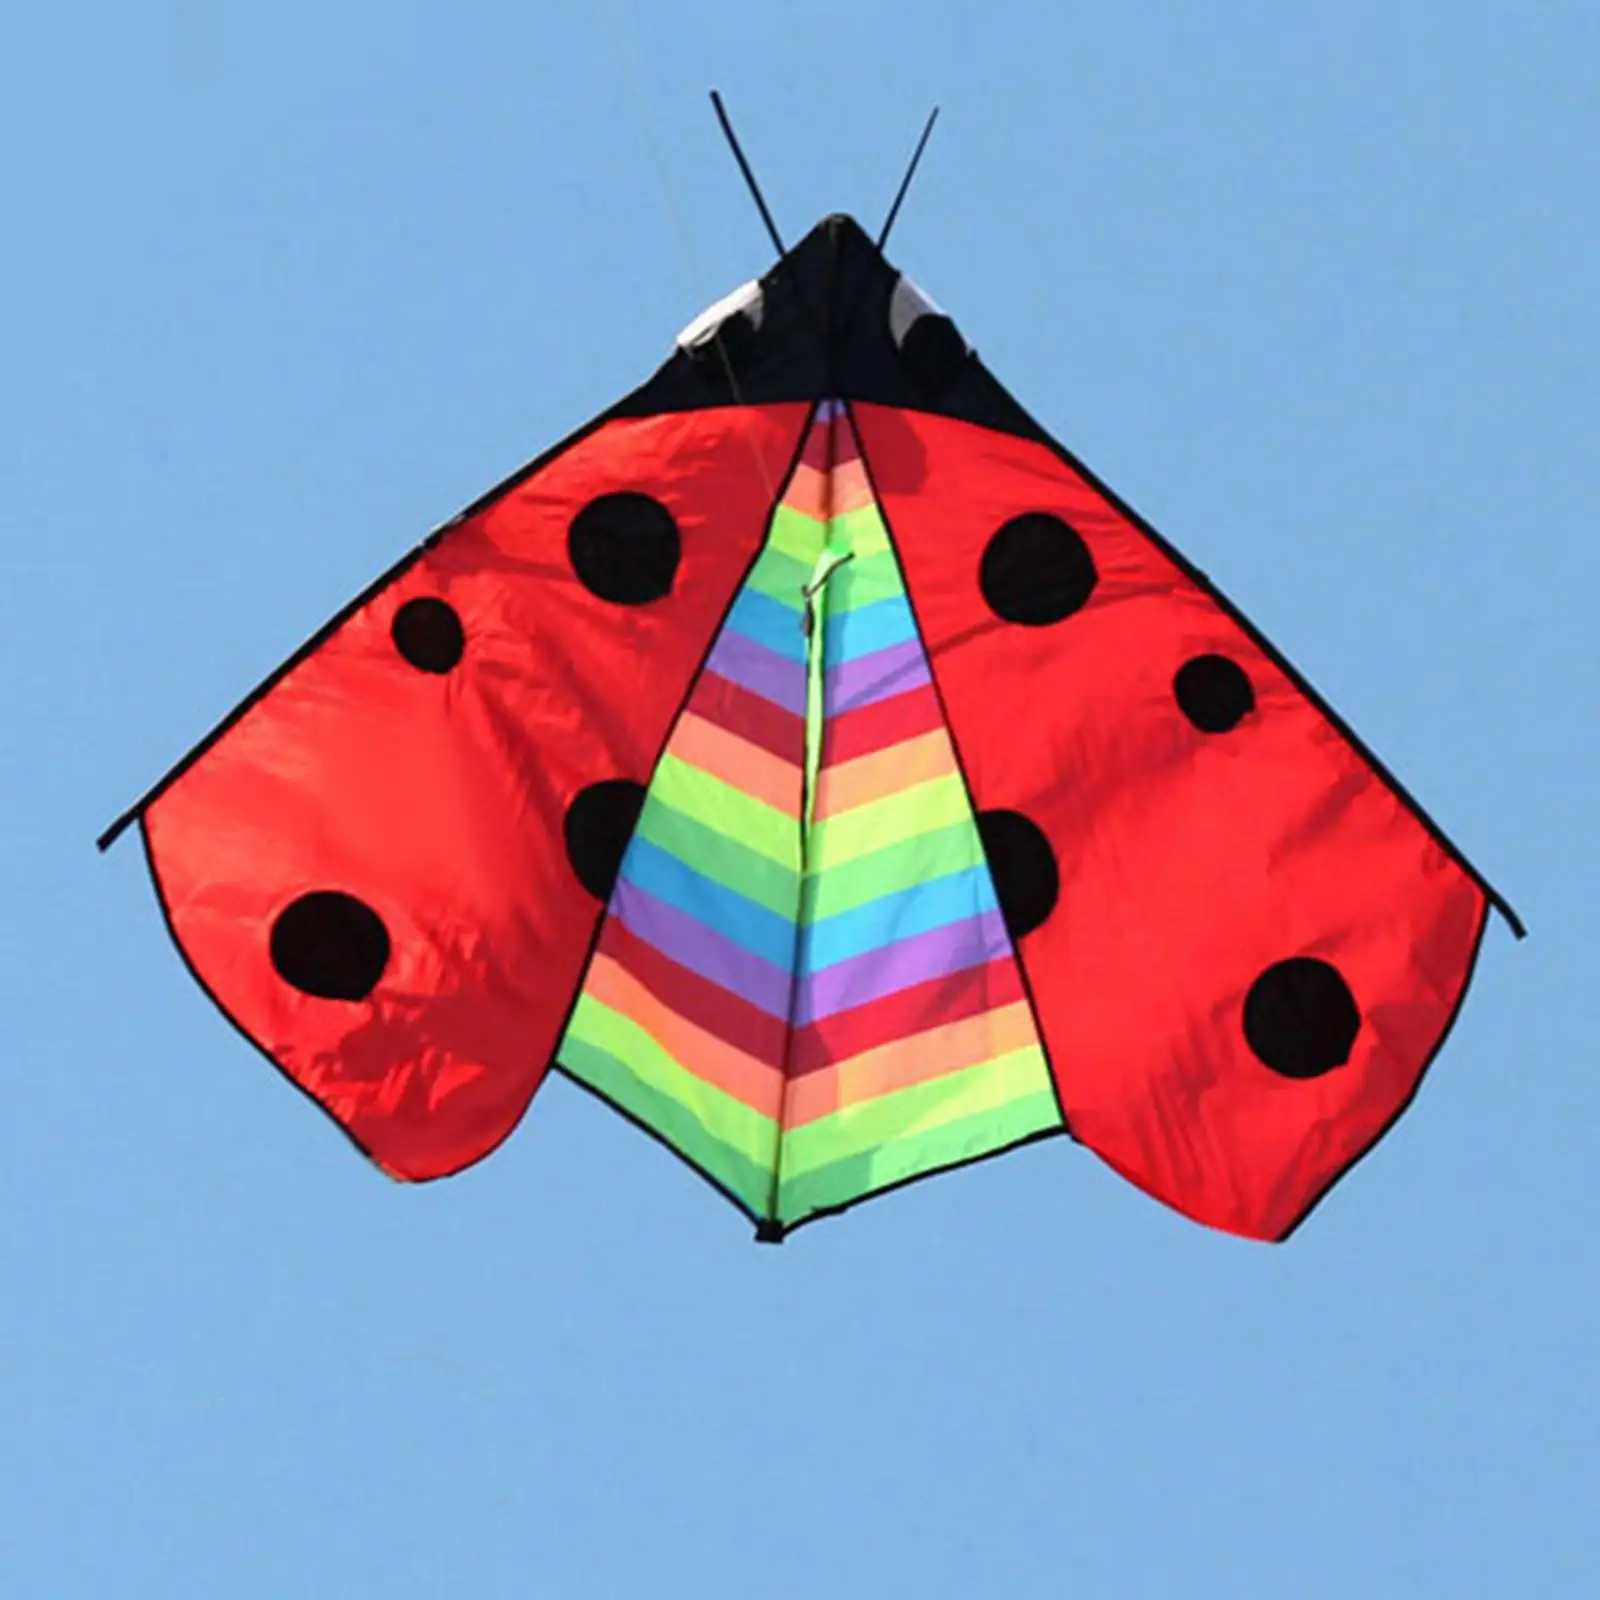 

Vivid Delta Kite Fly Kite Single Line Fun Toy Easy to Fly Huge Wingspan Windsock Giant Triangle Ladybug Kite for Garden Sports